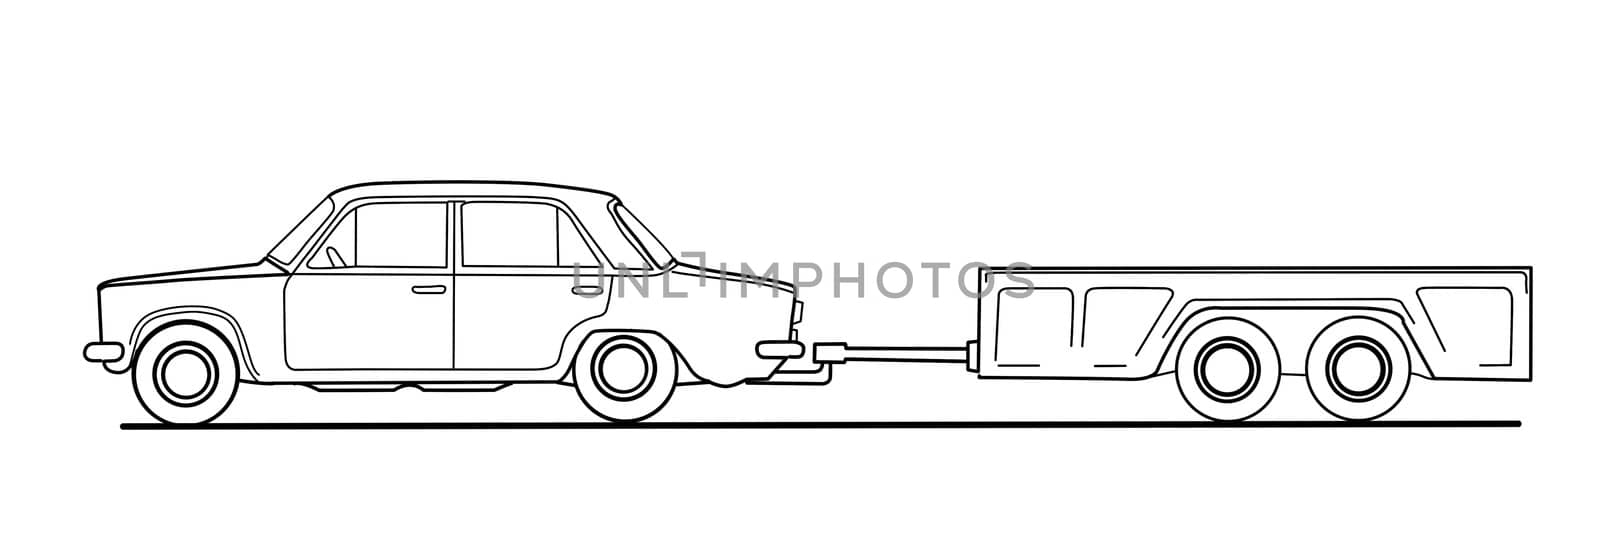 car with trailor on white background, vector illustration